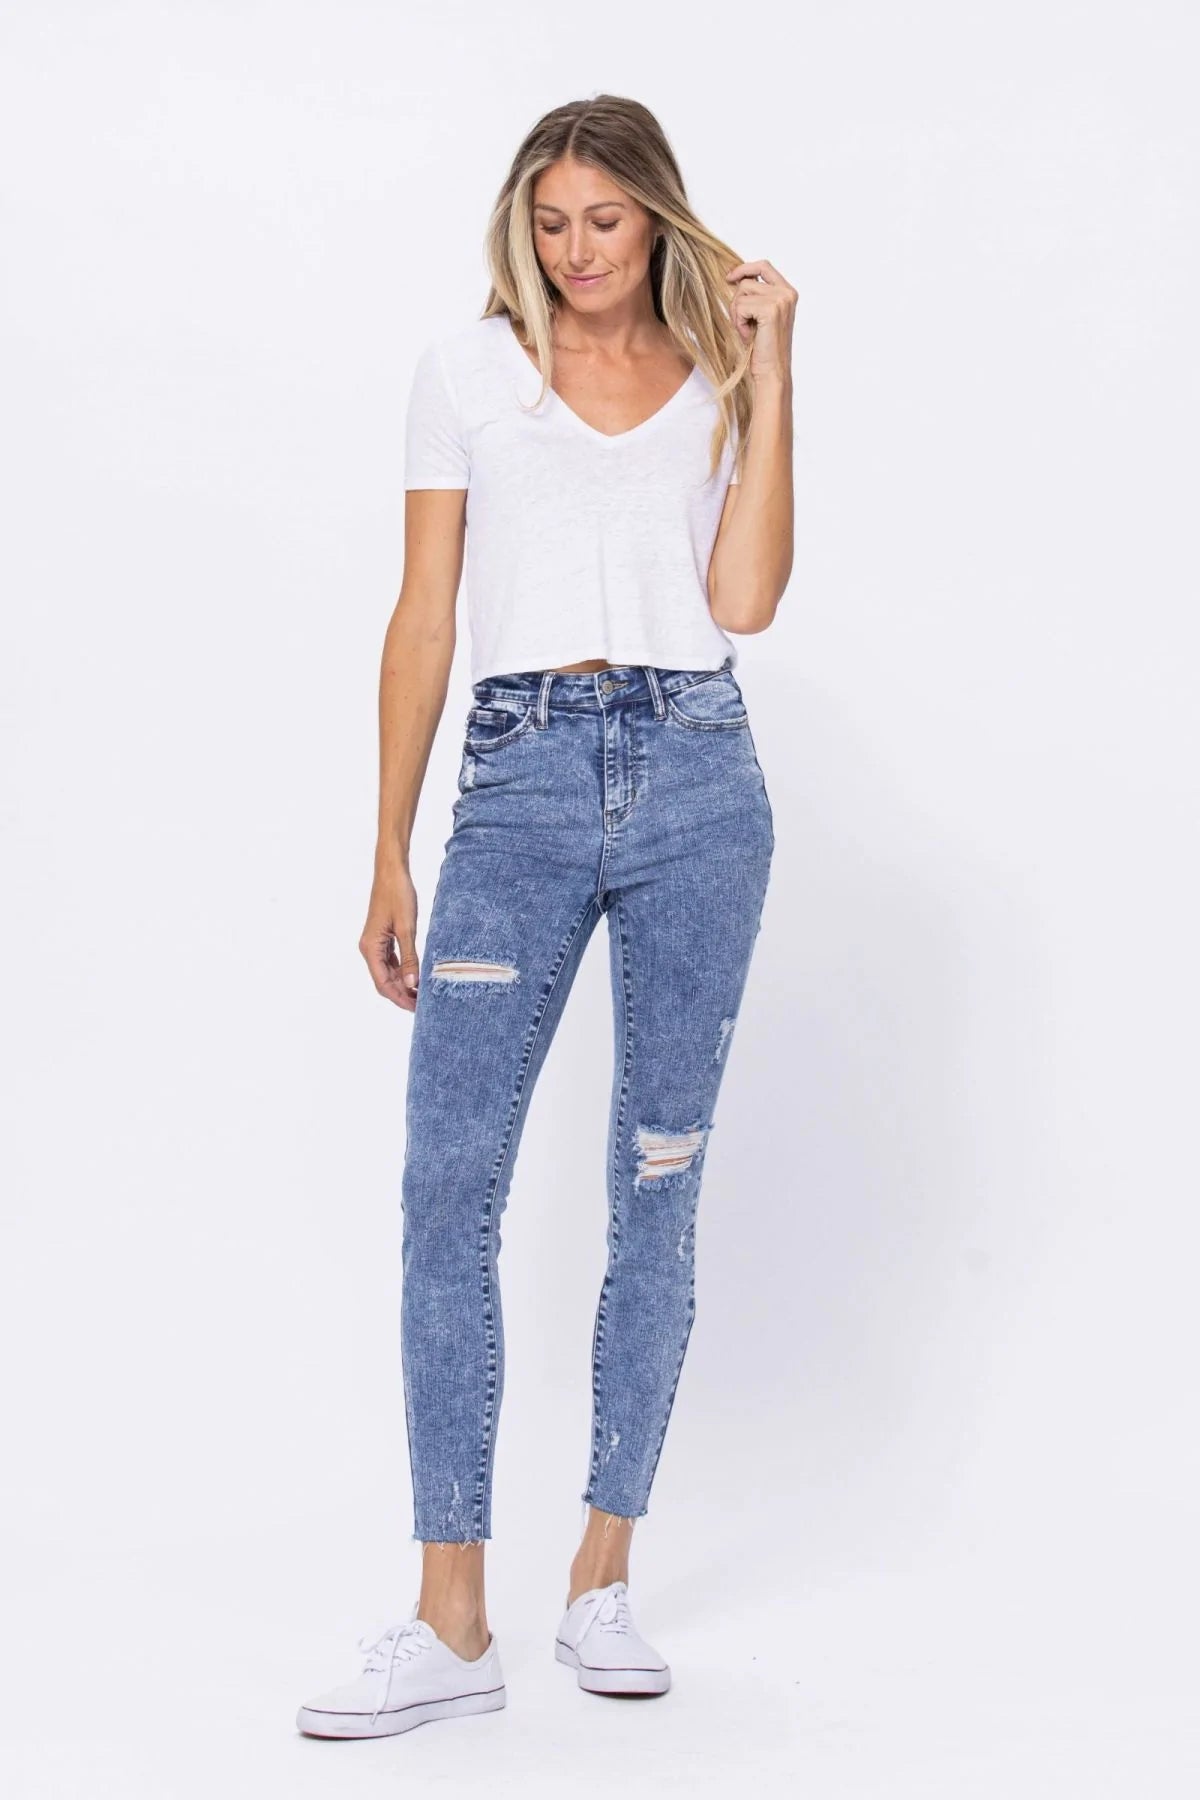 Judy Blue High Rise Acid Wash Destroyed Skinny Jeans - Passion of Essence Boutique